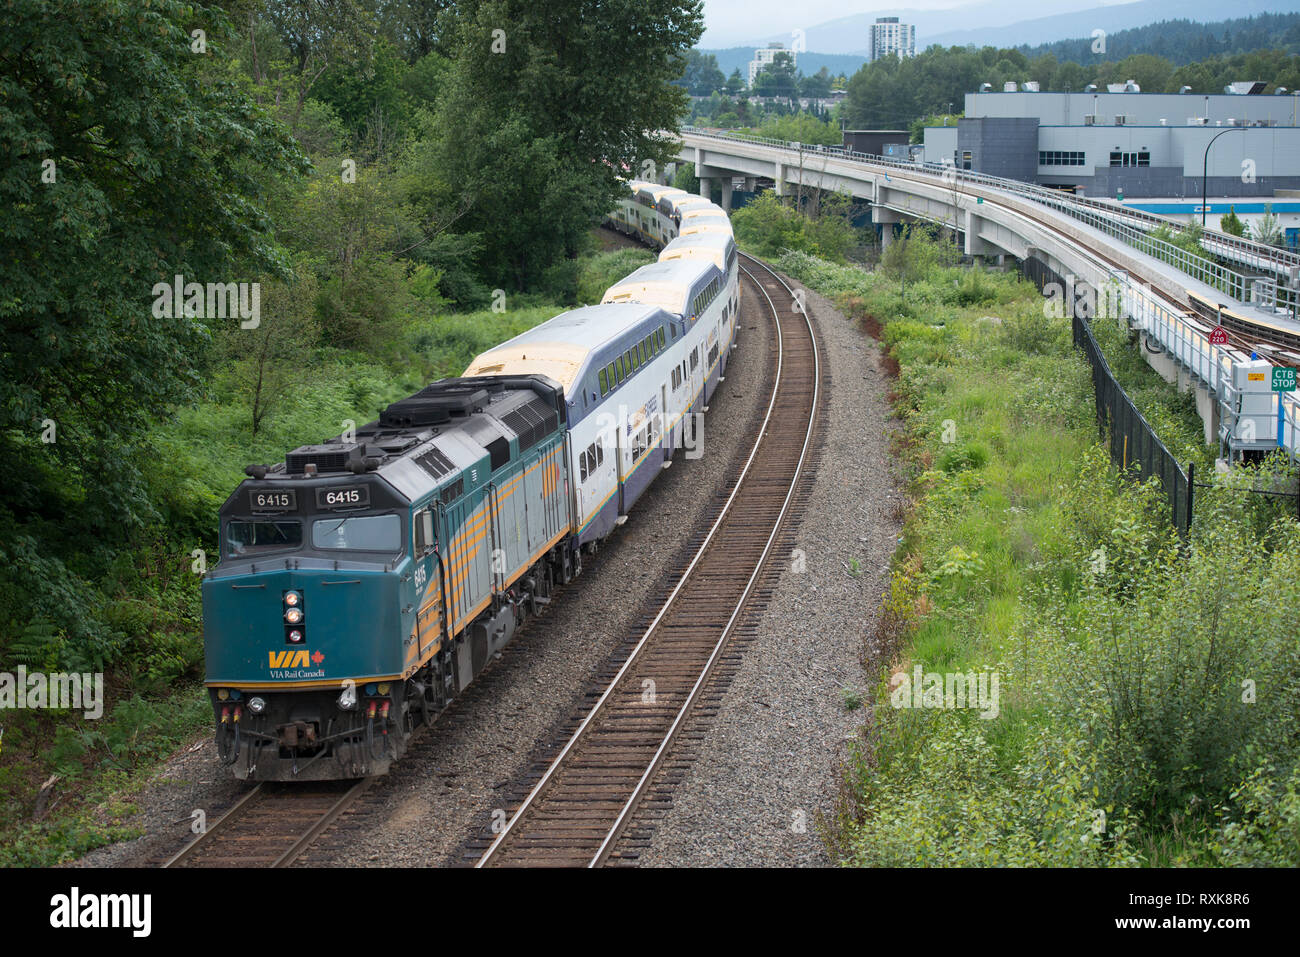 A Westcoast Express commuter train is lead by a VIA locomotive in Coquitlam, British Columbia, Canada. Stock Photo